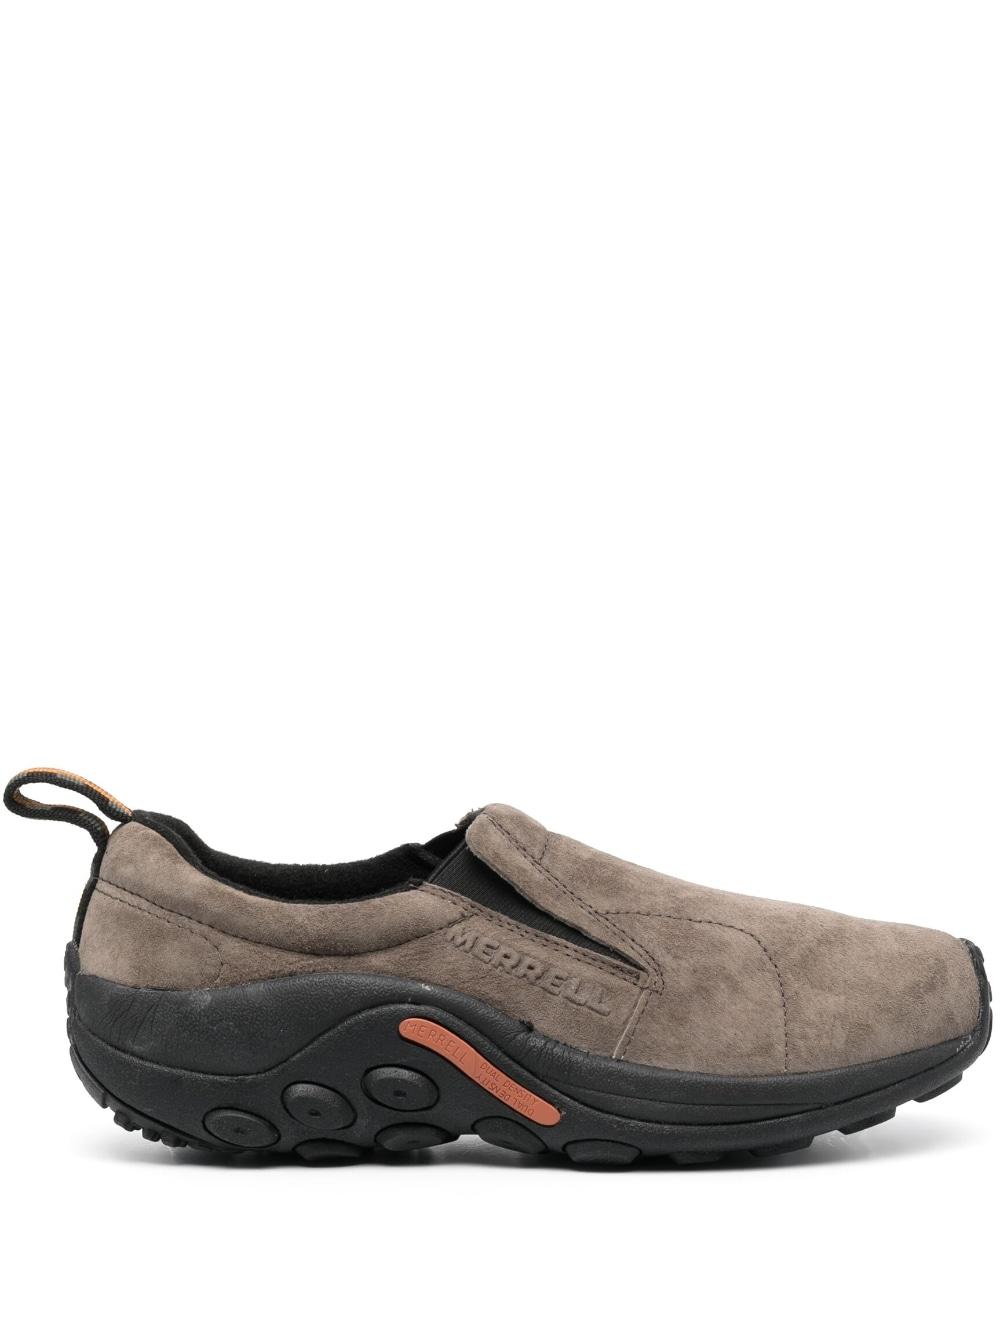 Merrell Jungle Moc Suede Low-top Sneakers in Gray for Men | Lyst